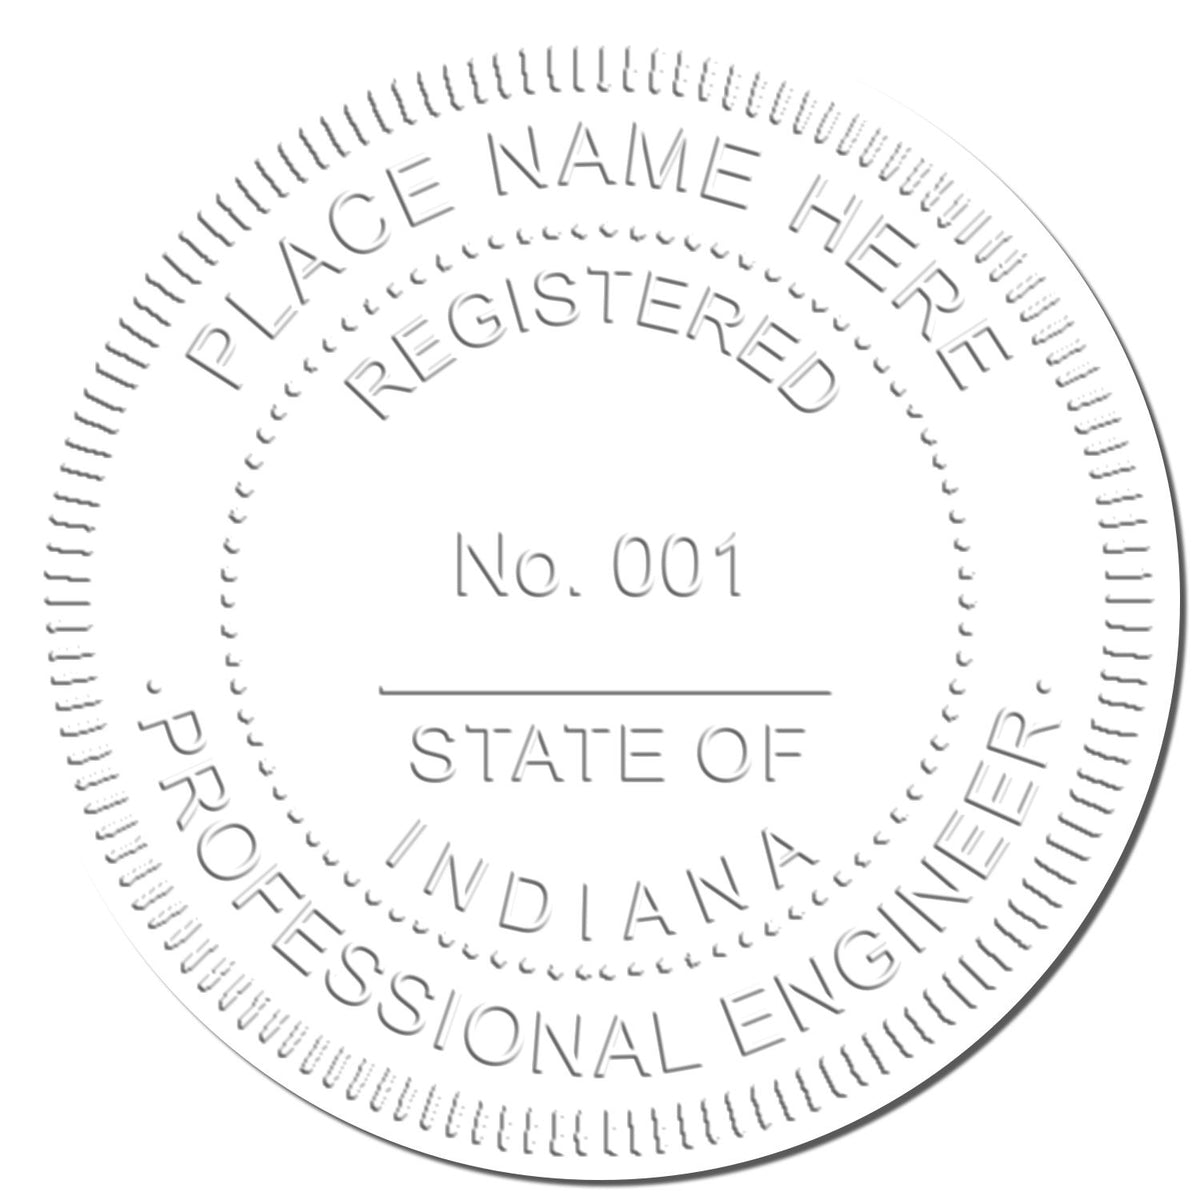 The Soft Indiana Professional Engineer Seal stamp impression comes to life with a crisp, detailed photo on paper - showcasing true professional quality.